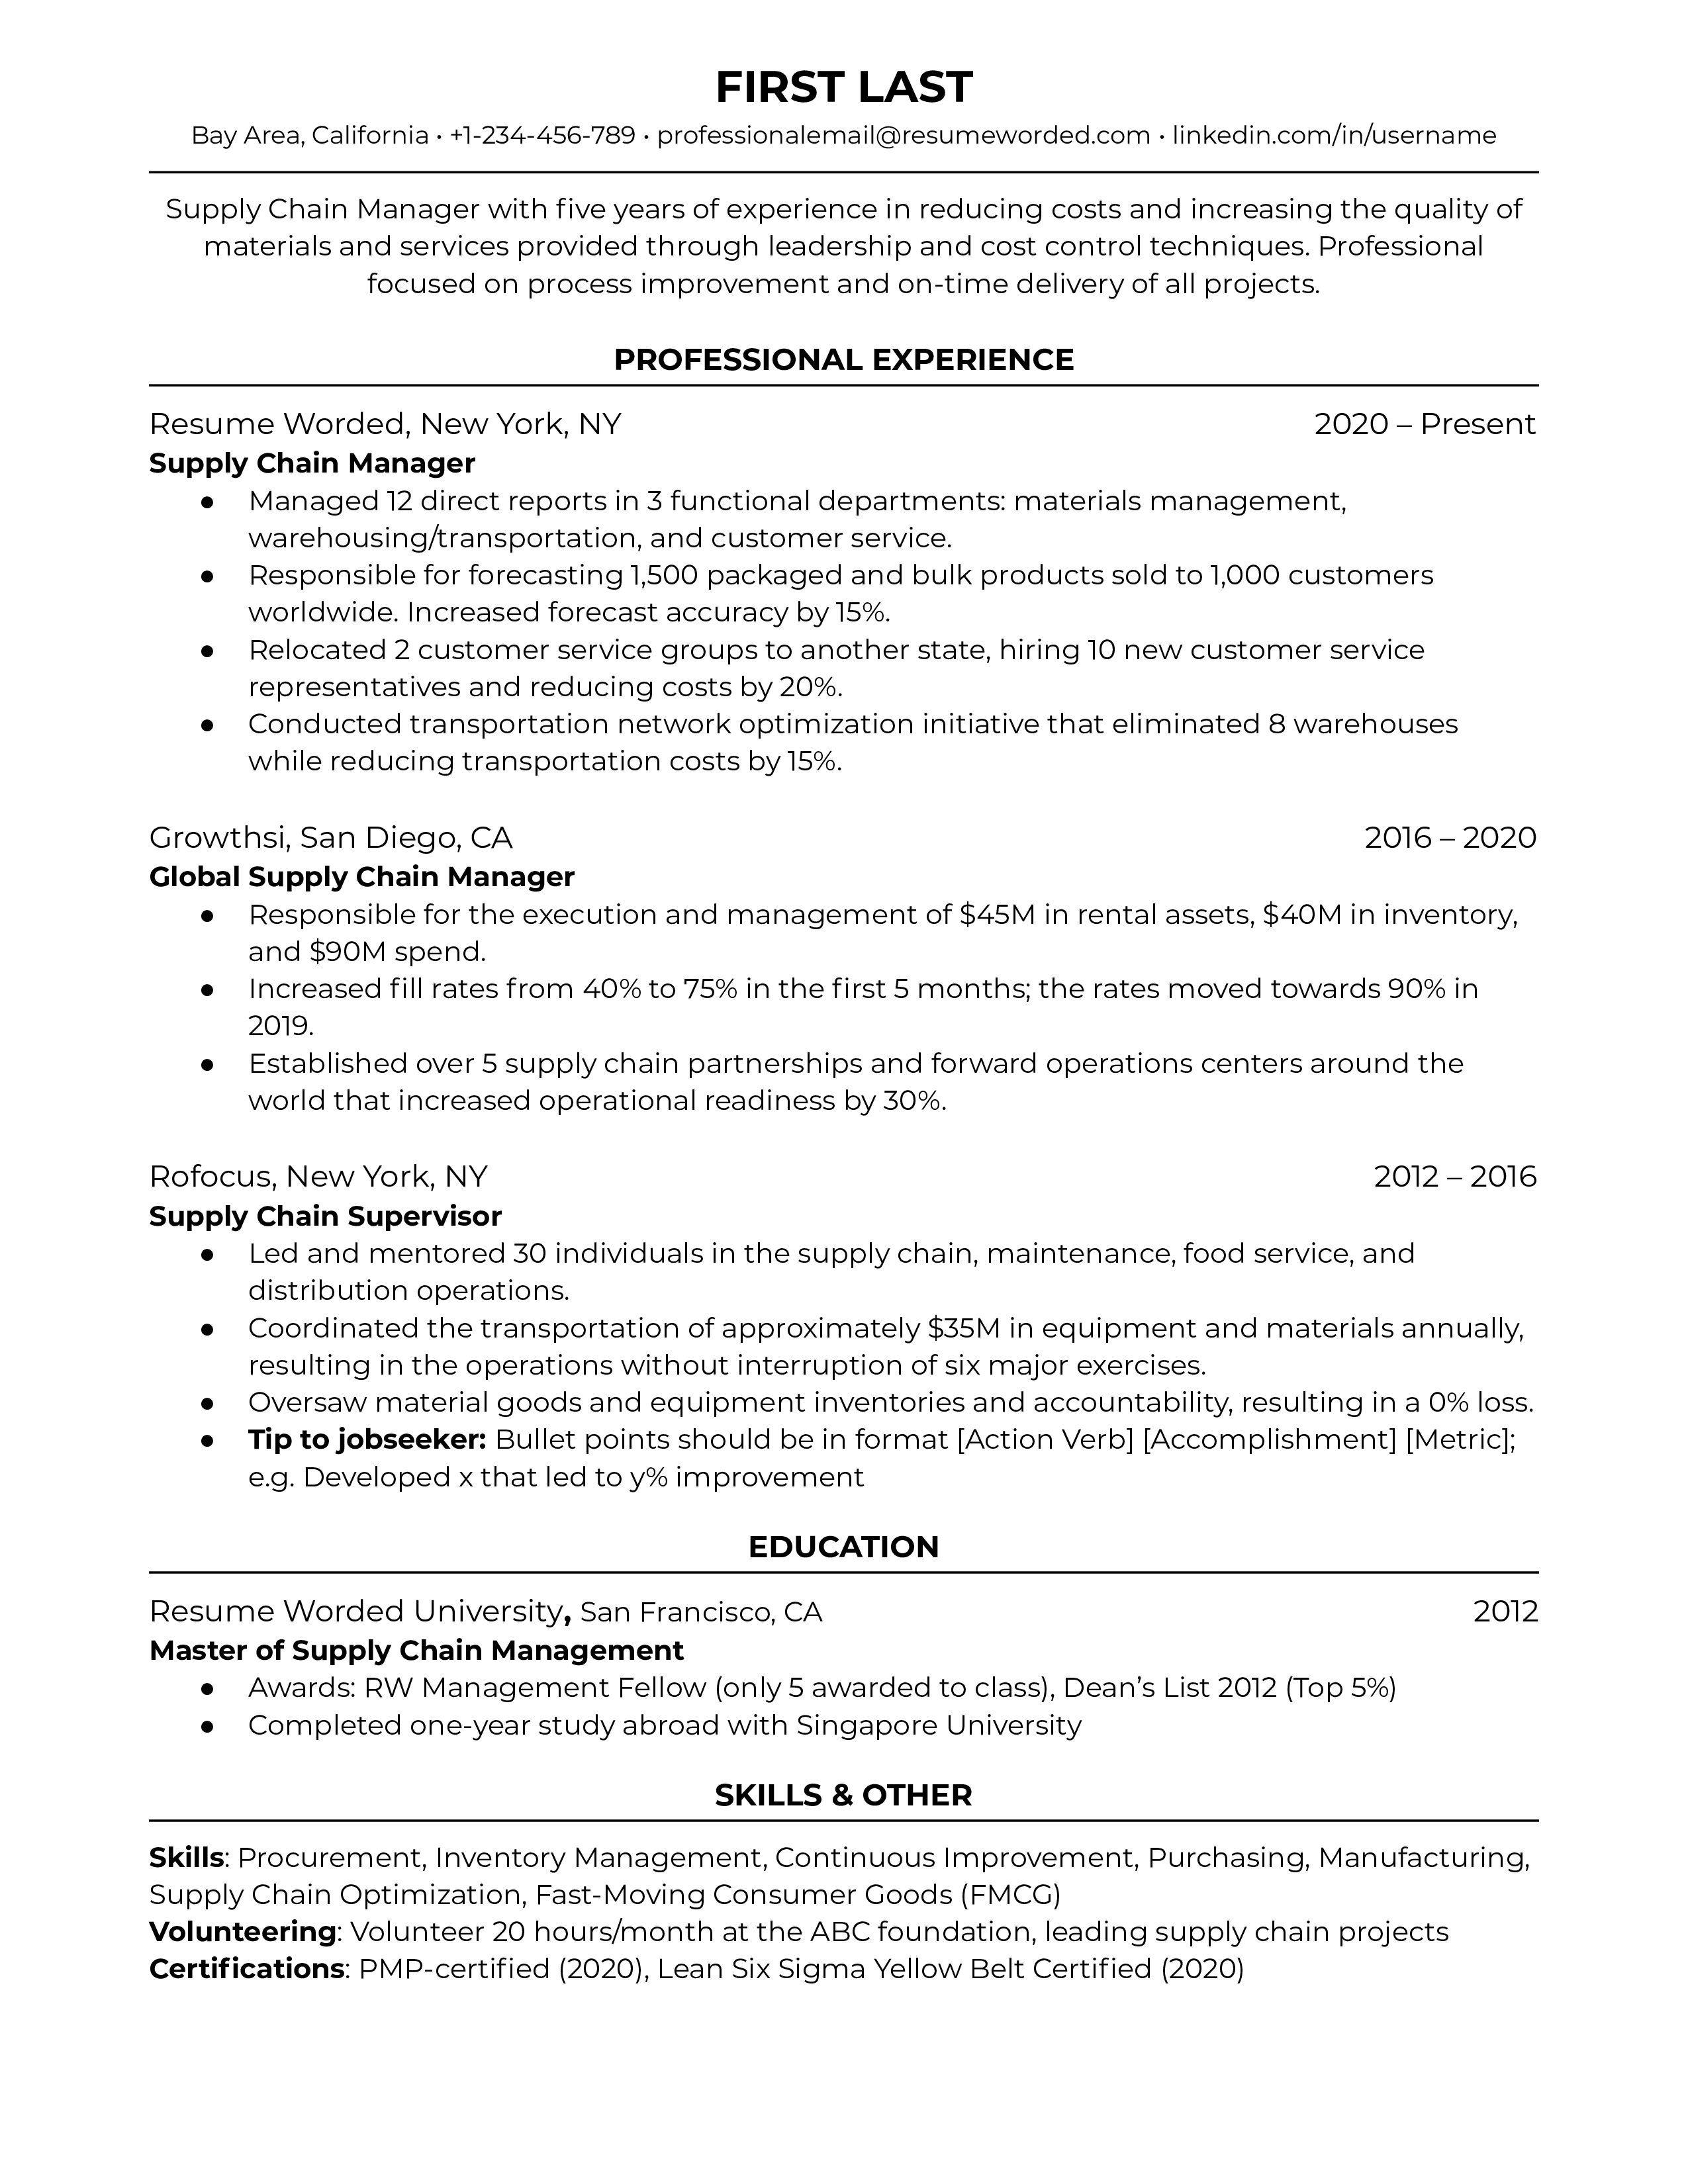 Supply Chain Manager Resume Sample